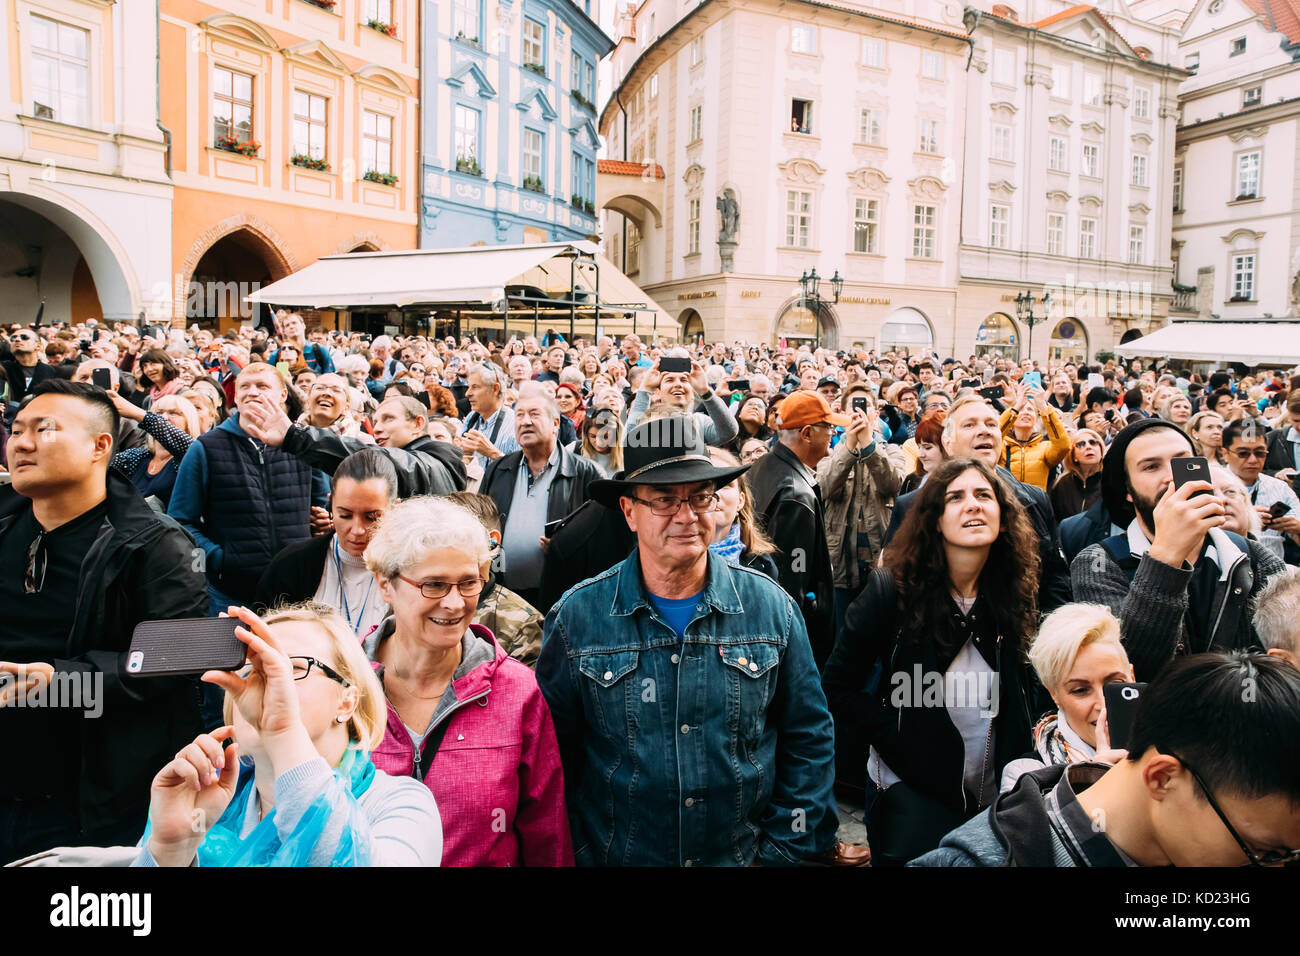 Prague, Czech Republic - September 22, 2017: Group Of Tourists Taking Photo And Looking At Wall Of Old Town Hall With Astronomical Clock Or Prague Orl Stock Photo